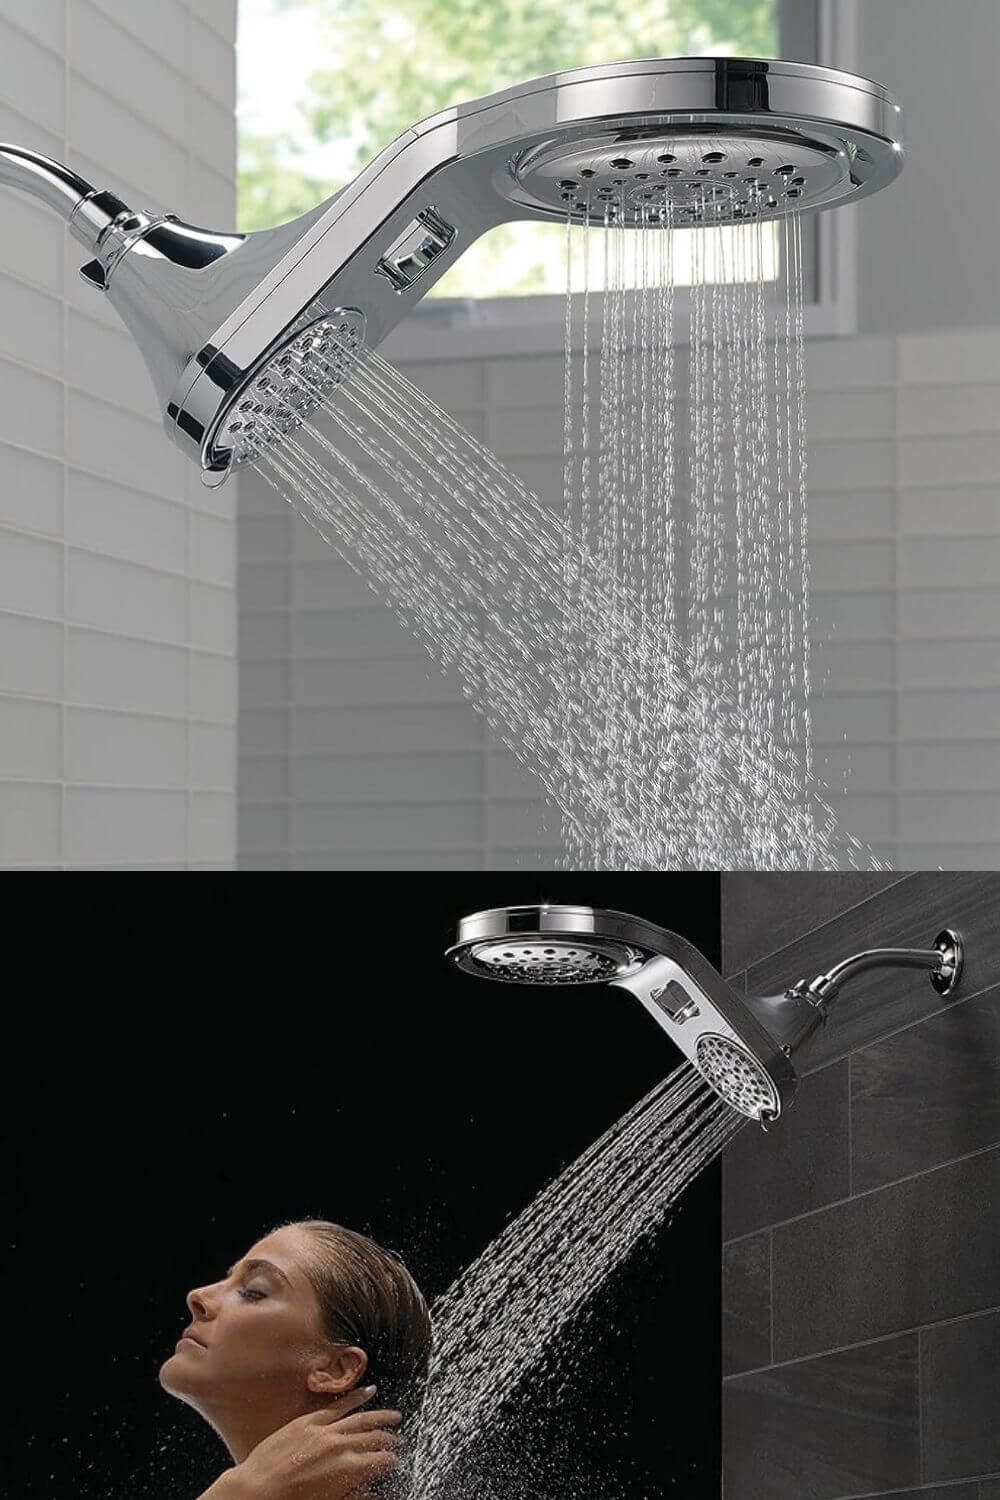 Delta Faucet HydroRain 2-in1 Rain Shower Head Allows for Single or Dual Operation